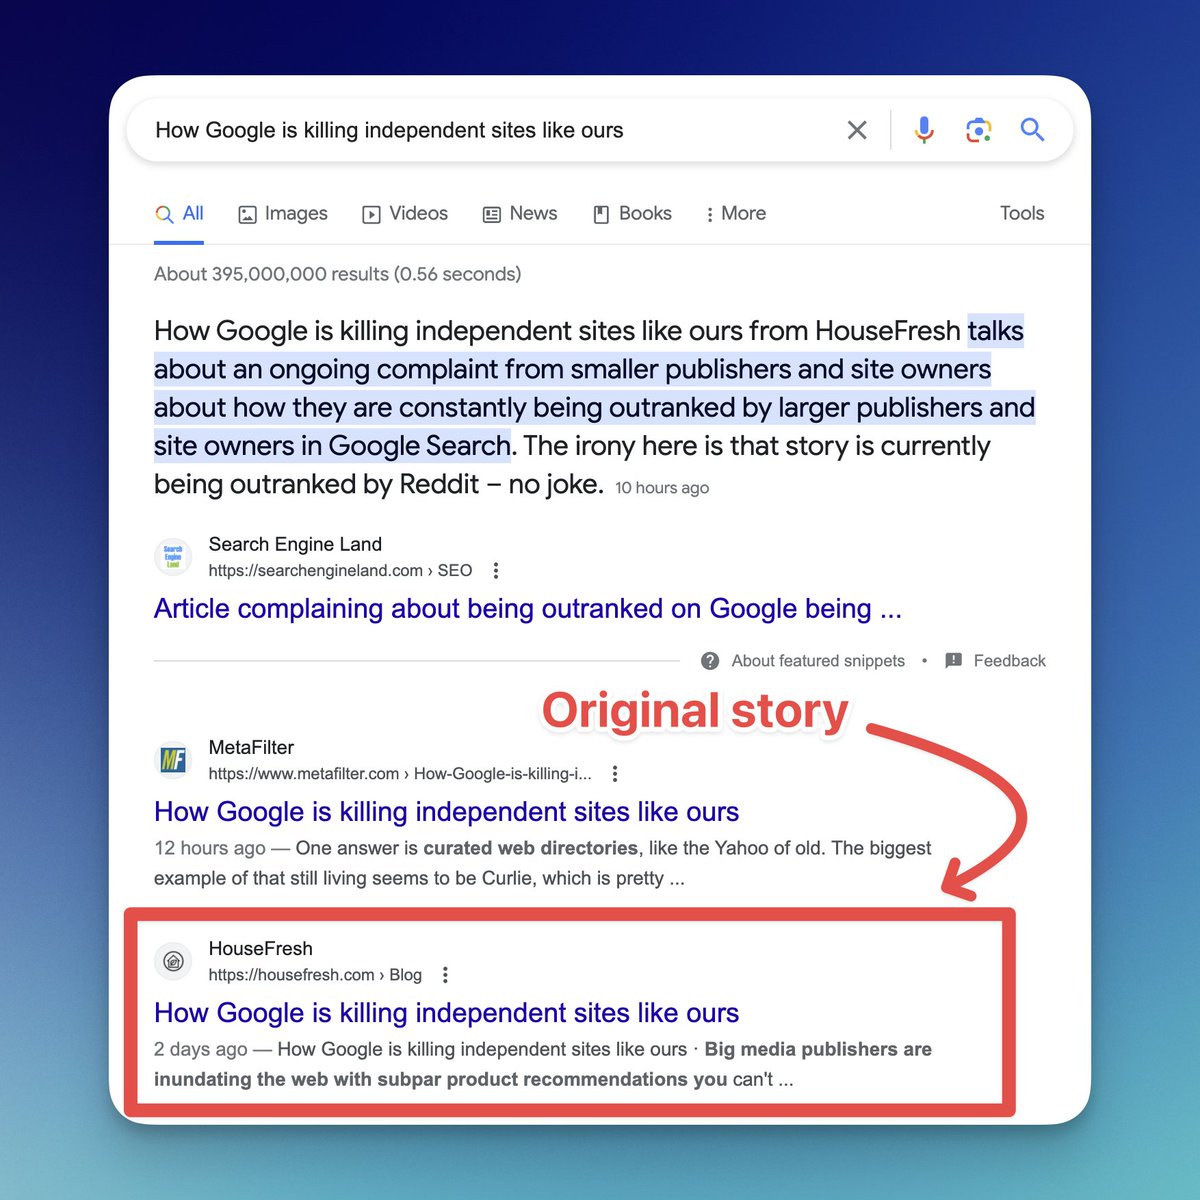 Imagine being the source of the story (and getting all the links) and STILL ranking #3 for the exact title of your article by higher authority sites. You don't even need to read the article. The screenshot shows how broken Google currently is.